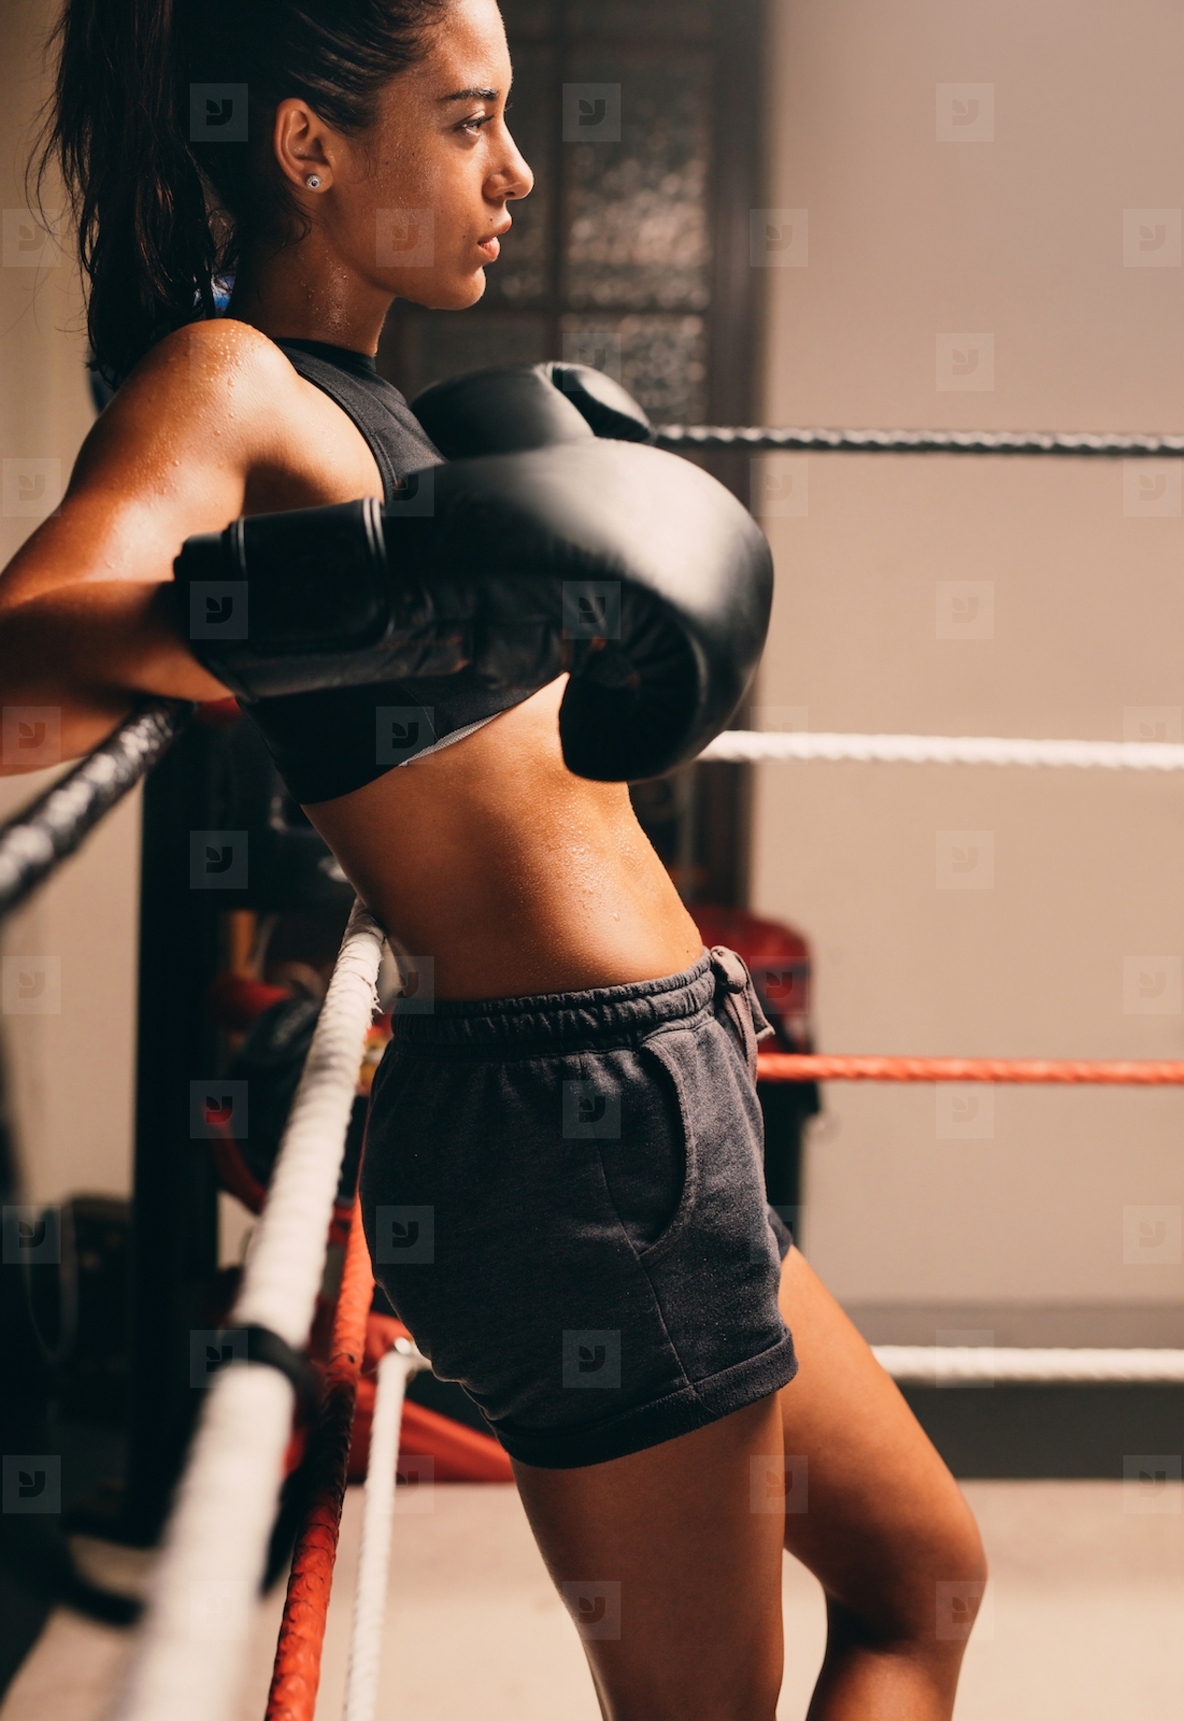 Confident female boxer leaning against boxing ring ropes